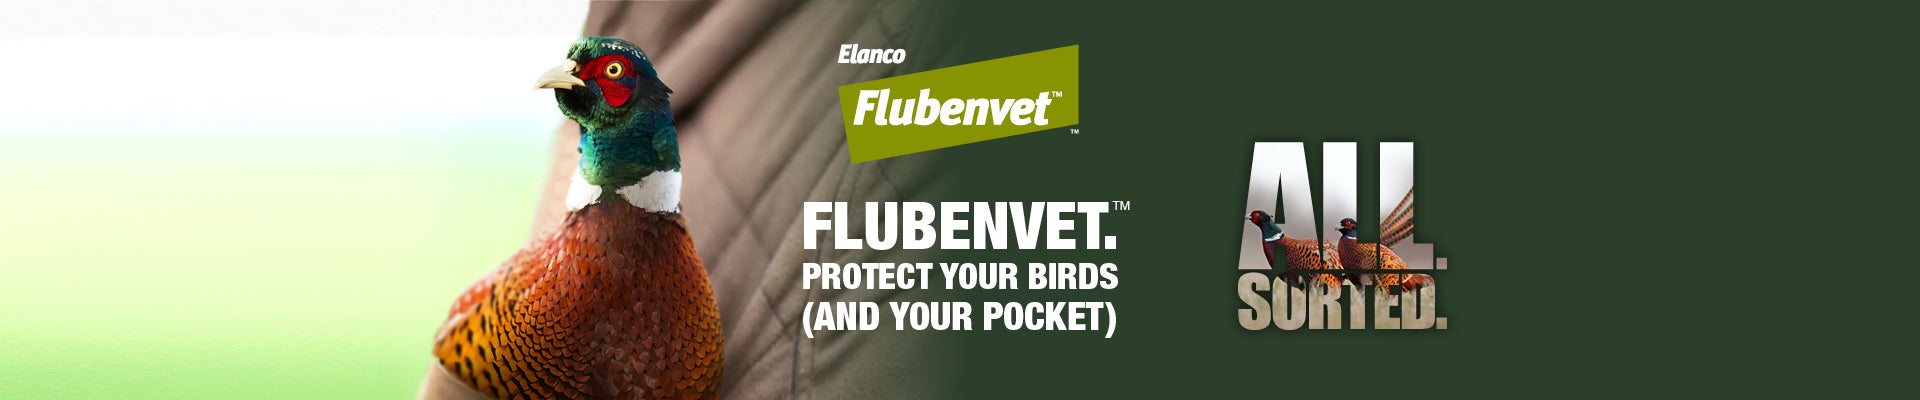 Flubenvet - protect your birds and your pocket